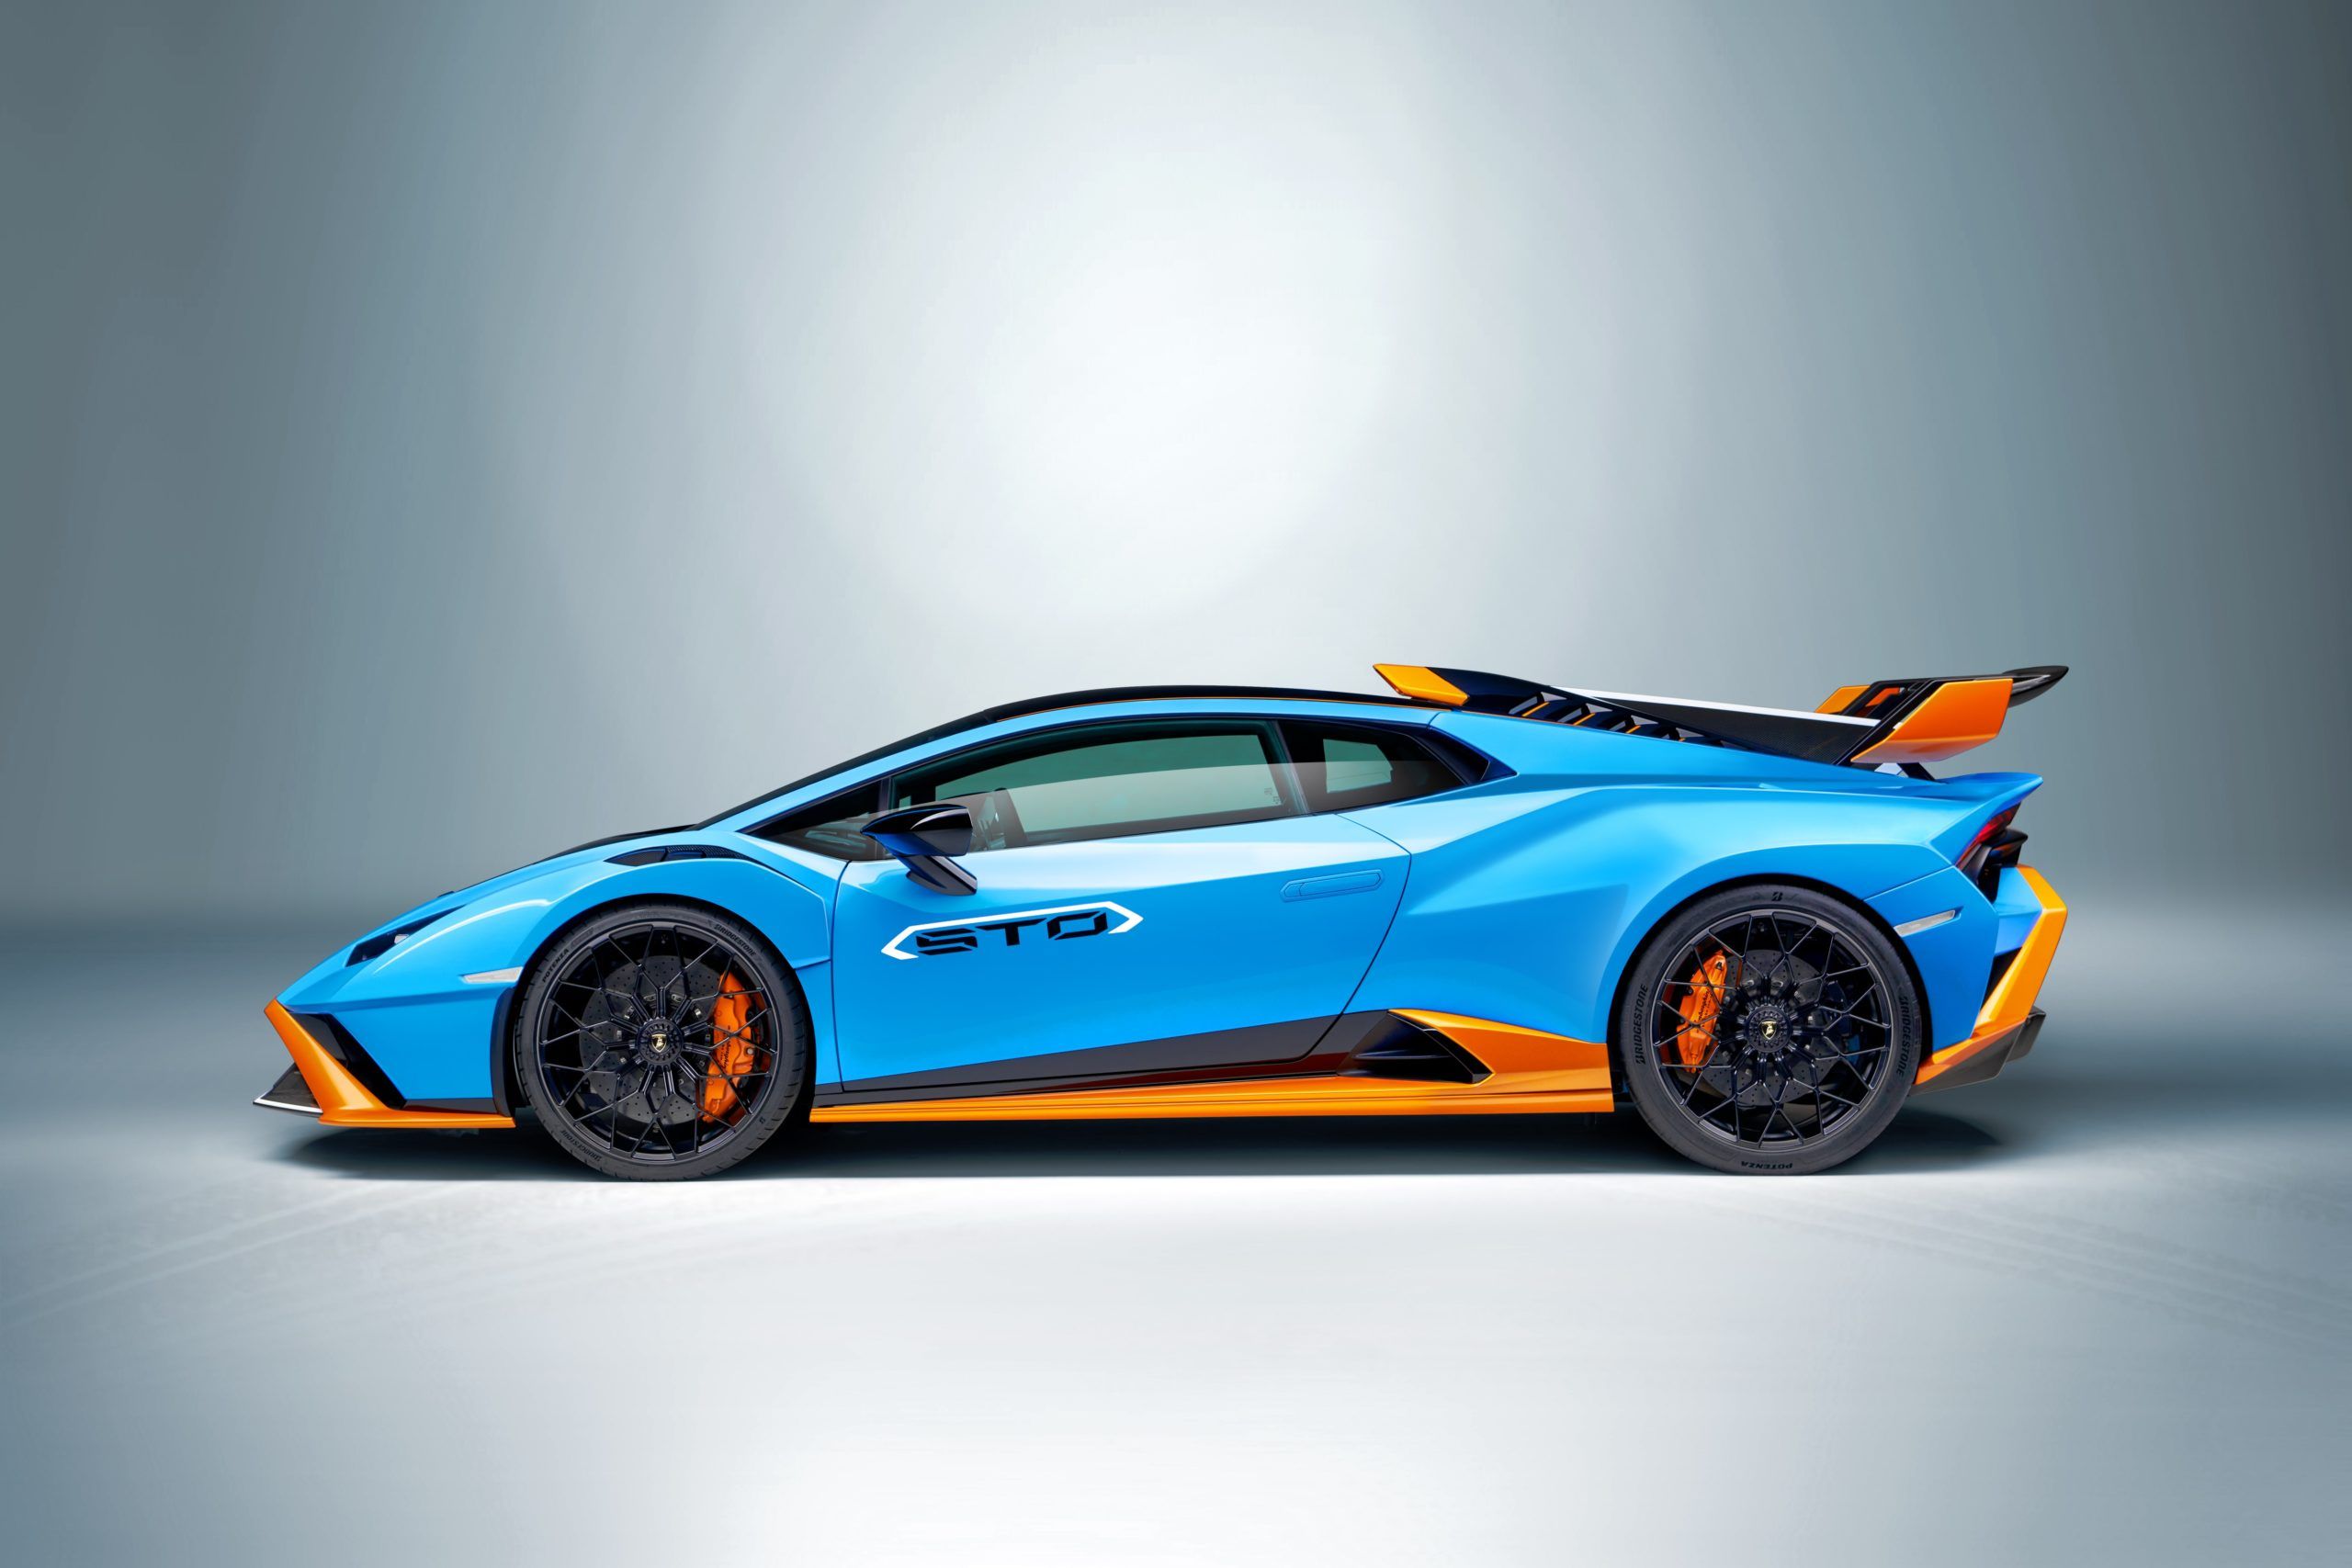 VROOM VROOM: Lamborghini Races Back on the Track with the New Huracán STO